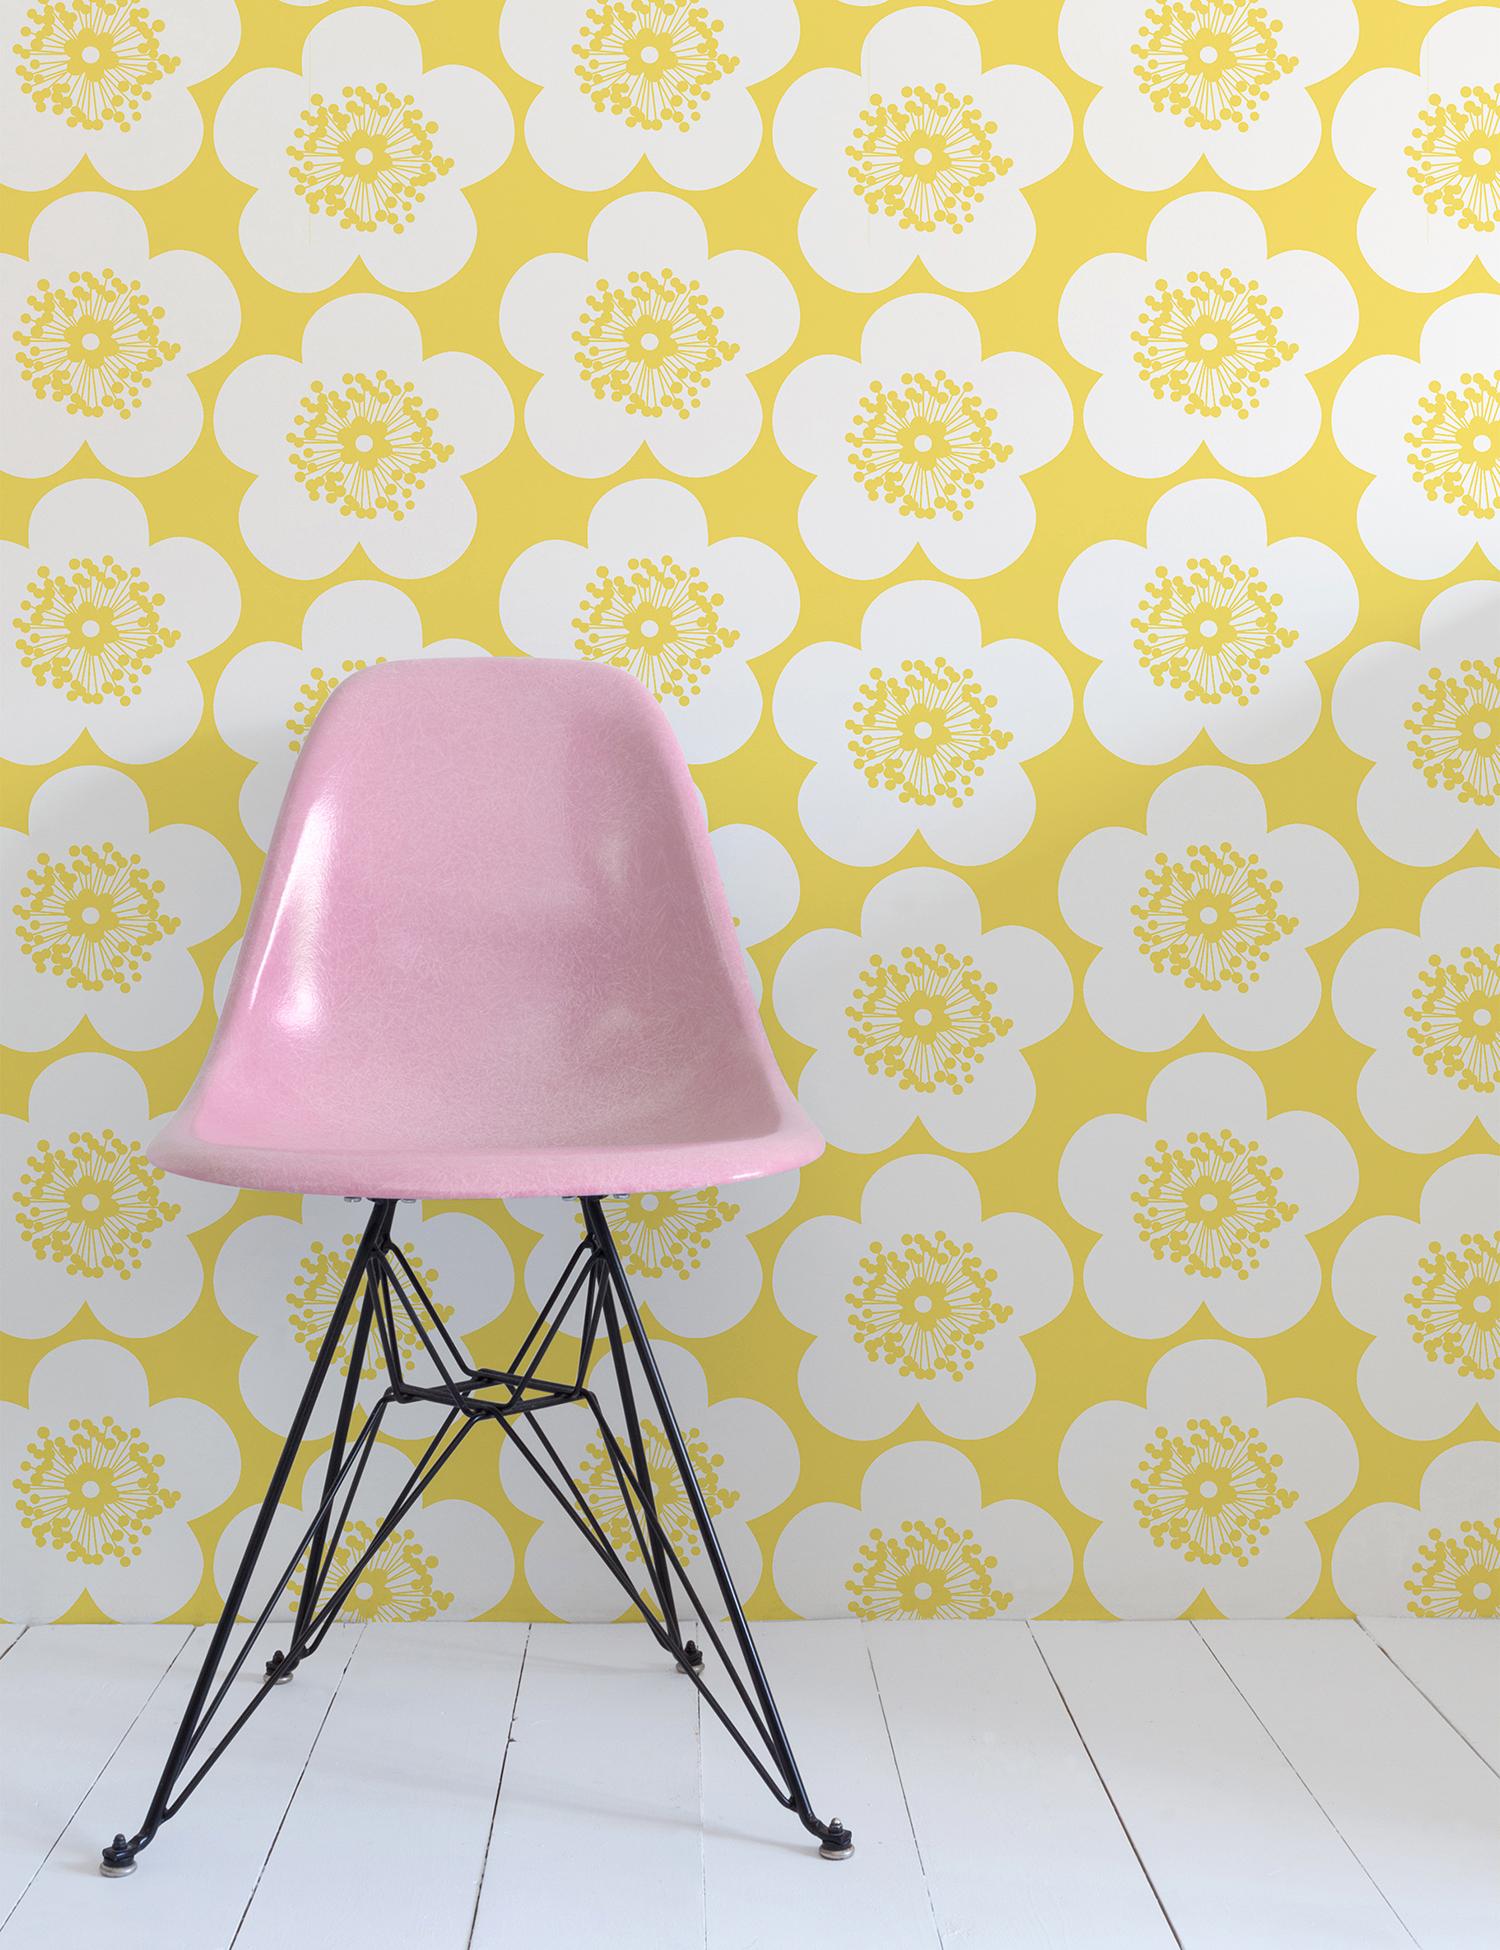 This wall-covering with oversized pop art flowers is the perfect wallpaper for your child's room!

Samples are available for $18 including US shipping, please message us to purchase.
 
Printing: Screen-printed by hand (must be ordered in even